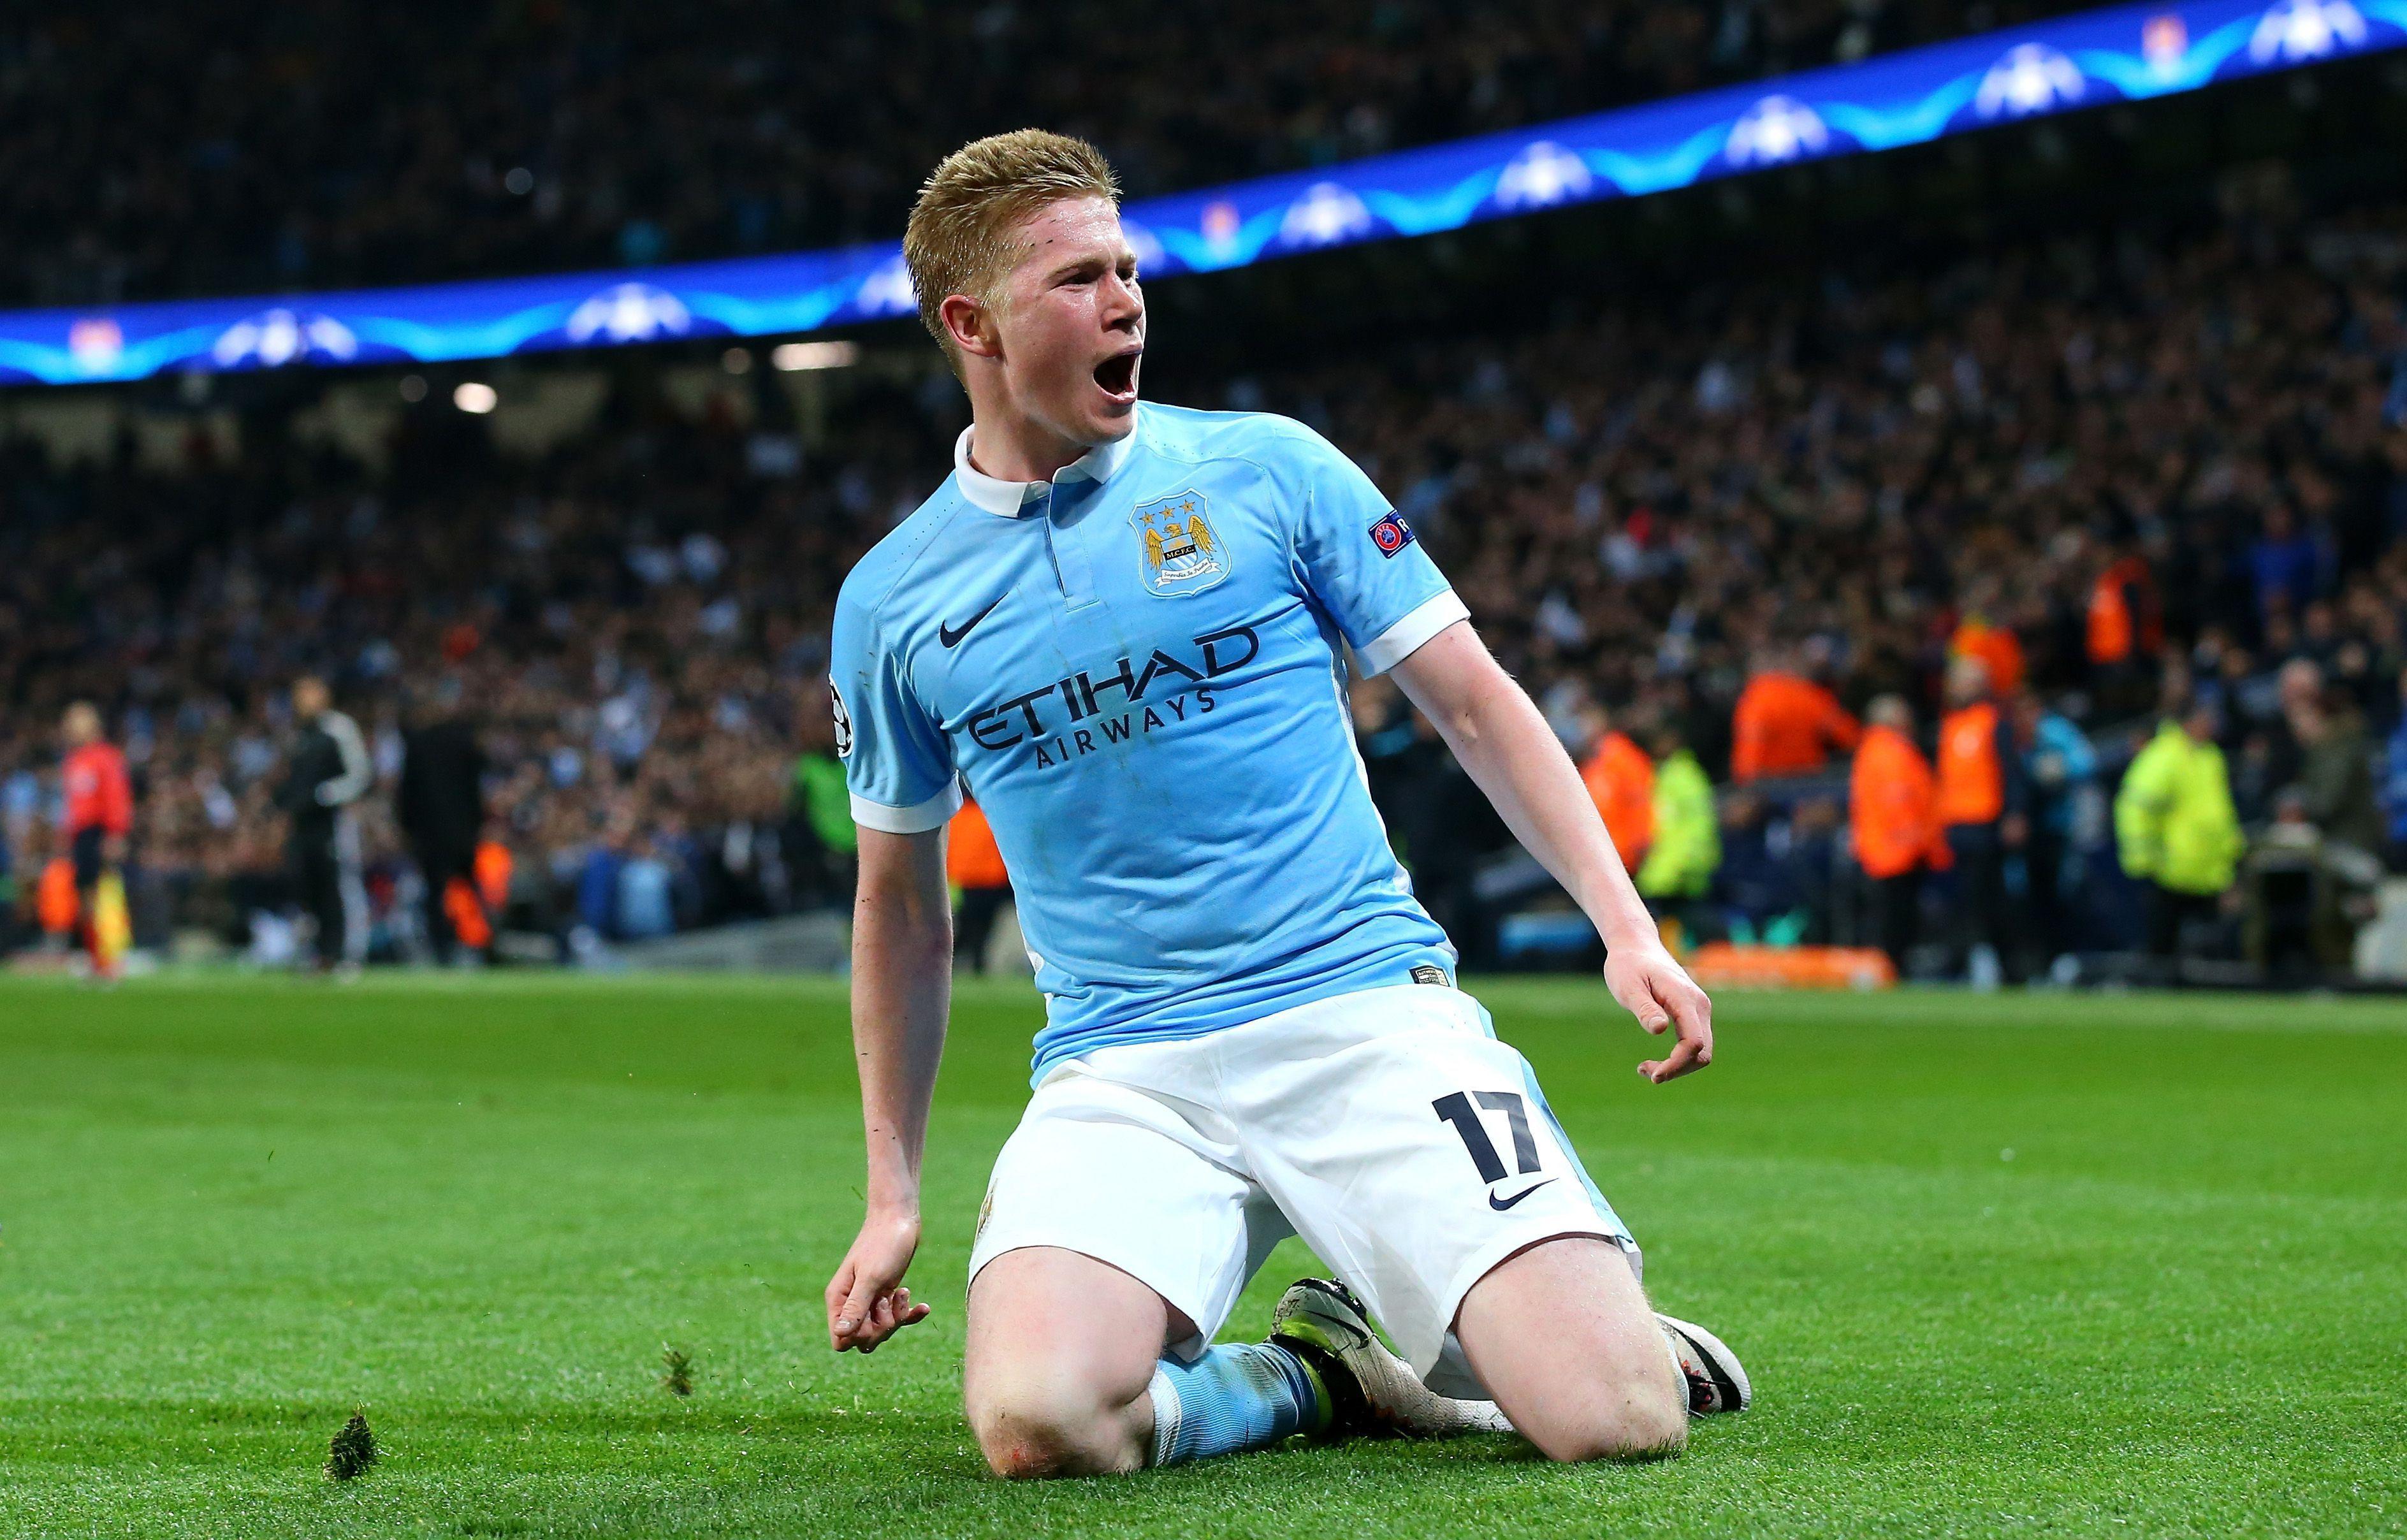 Kevin de Bruyne Wallpaper Image Photo Picture Background